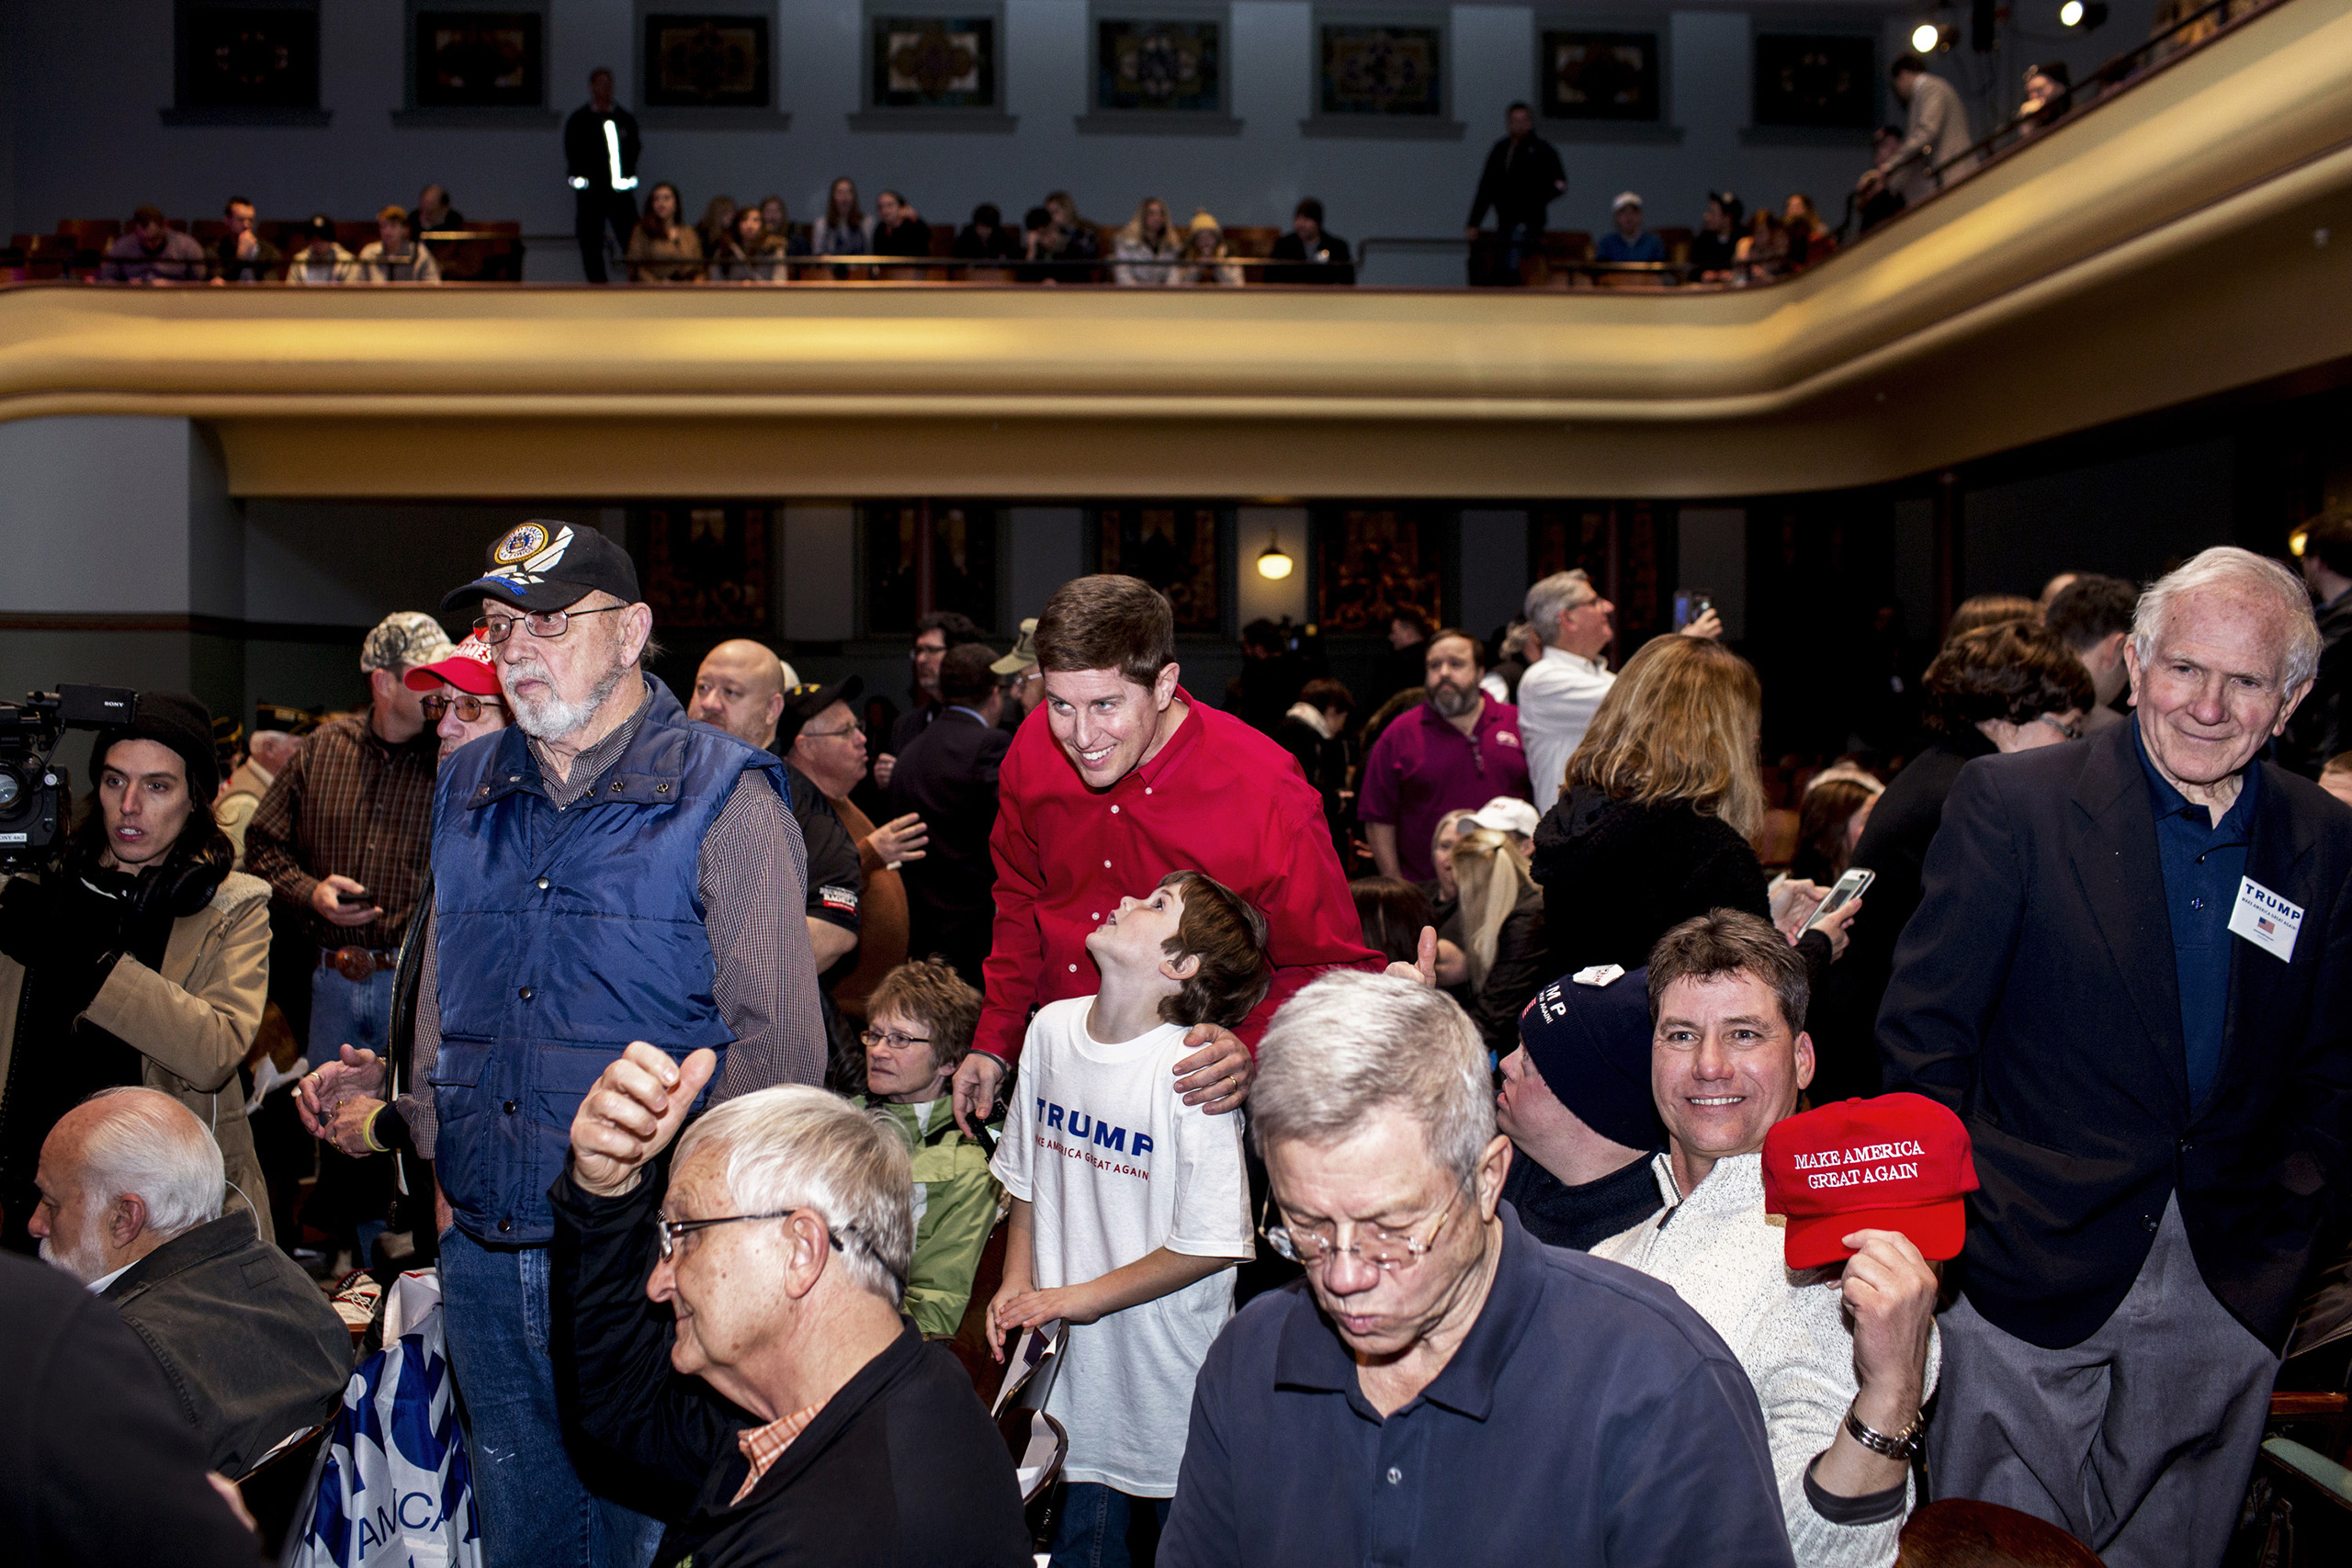 Supporters attend a campaign rally at Drake University in Des Moines, Iowa, on Thursday  Jan. 28, 2016.